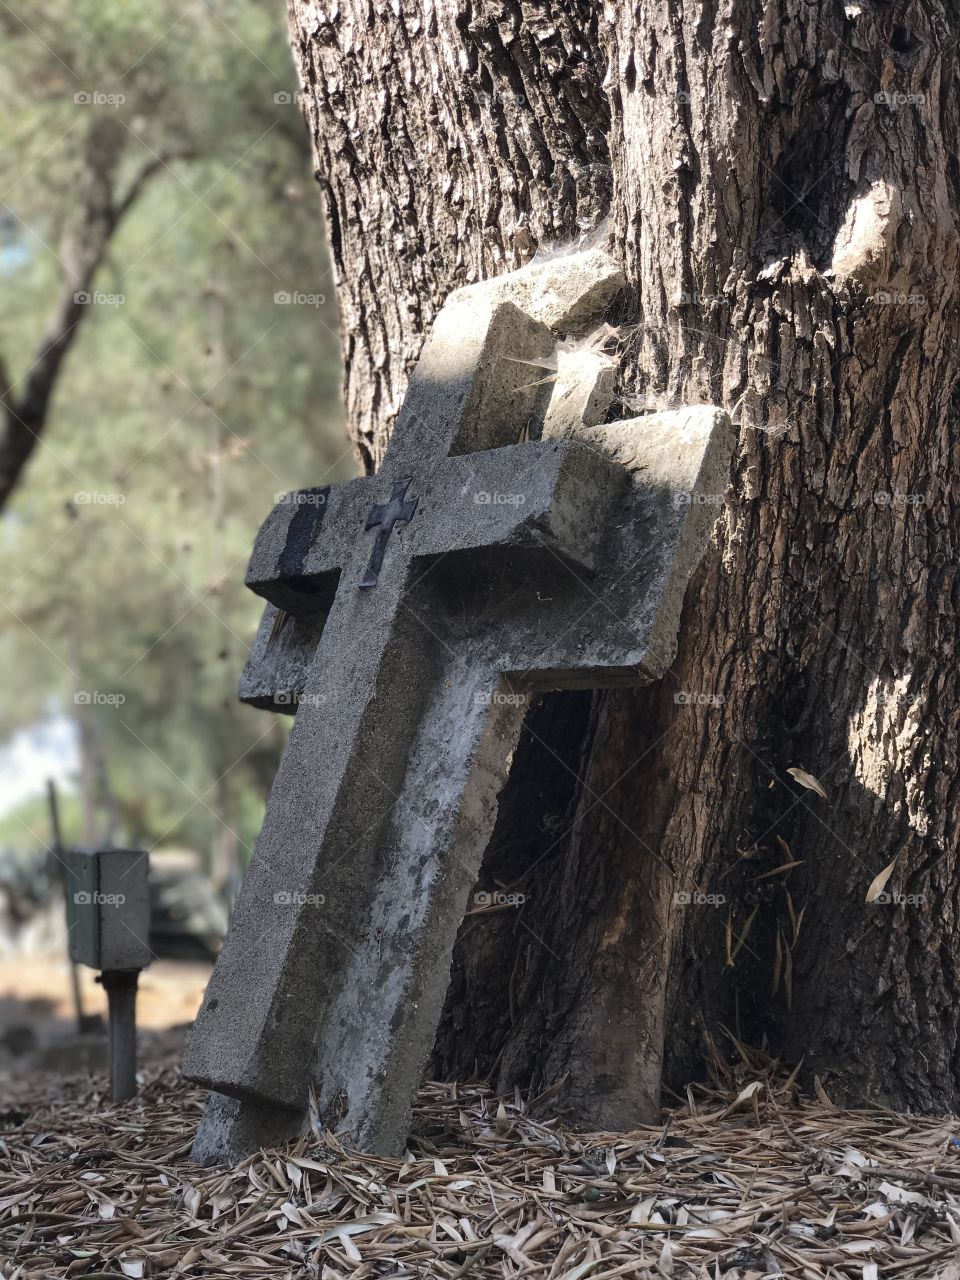 “La Cruz” ~ This cross sits against a tree in the cemetery located in the San Juan Bautista Mission Church. #Cementerio #Cruz #Cross #NoFilters 